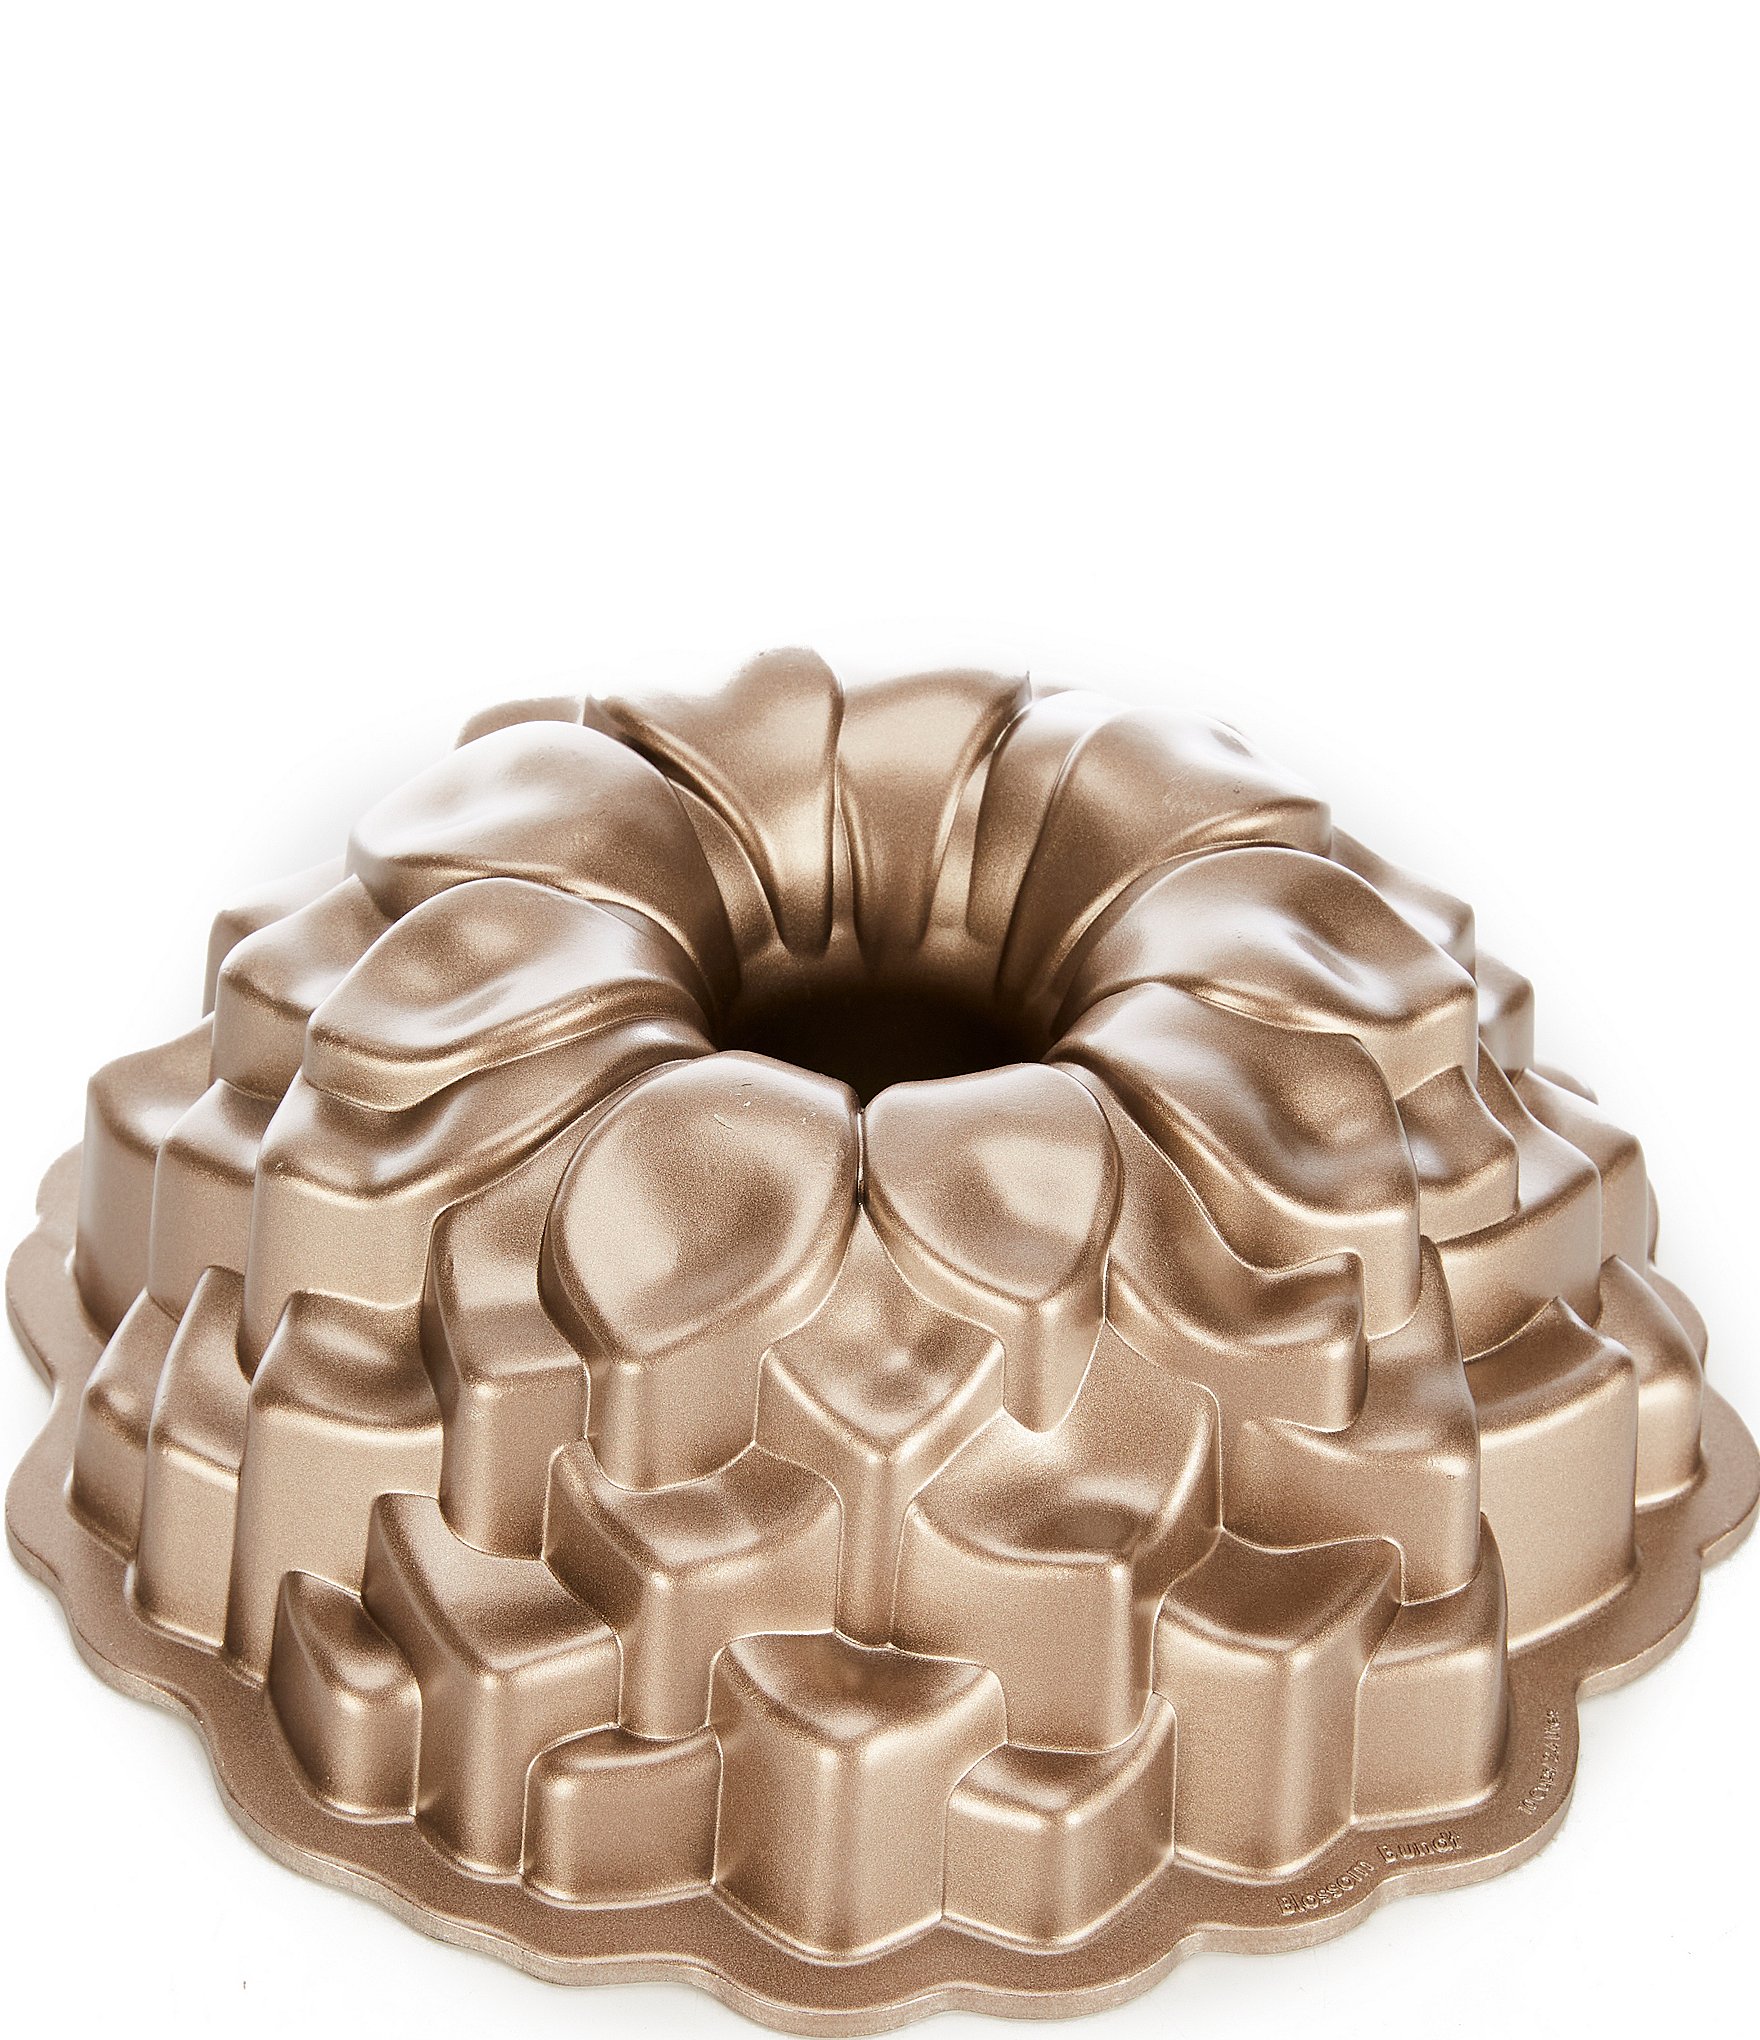 Southern Living Blossom Bundt Pan, Toffee - Dillard's Exclusive